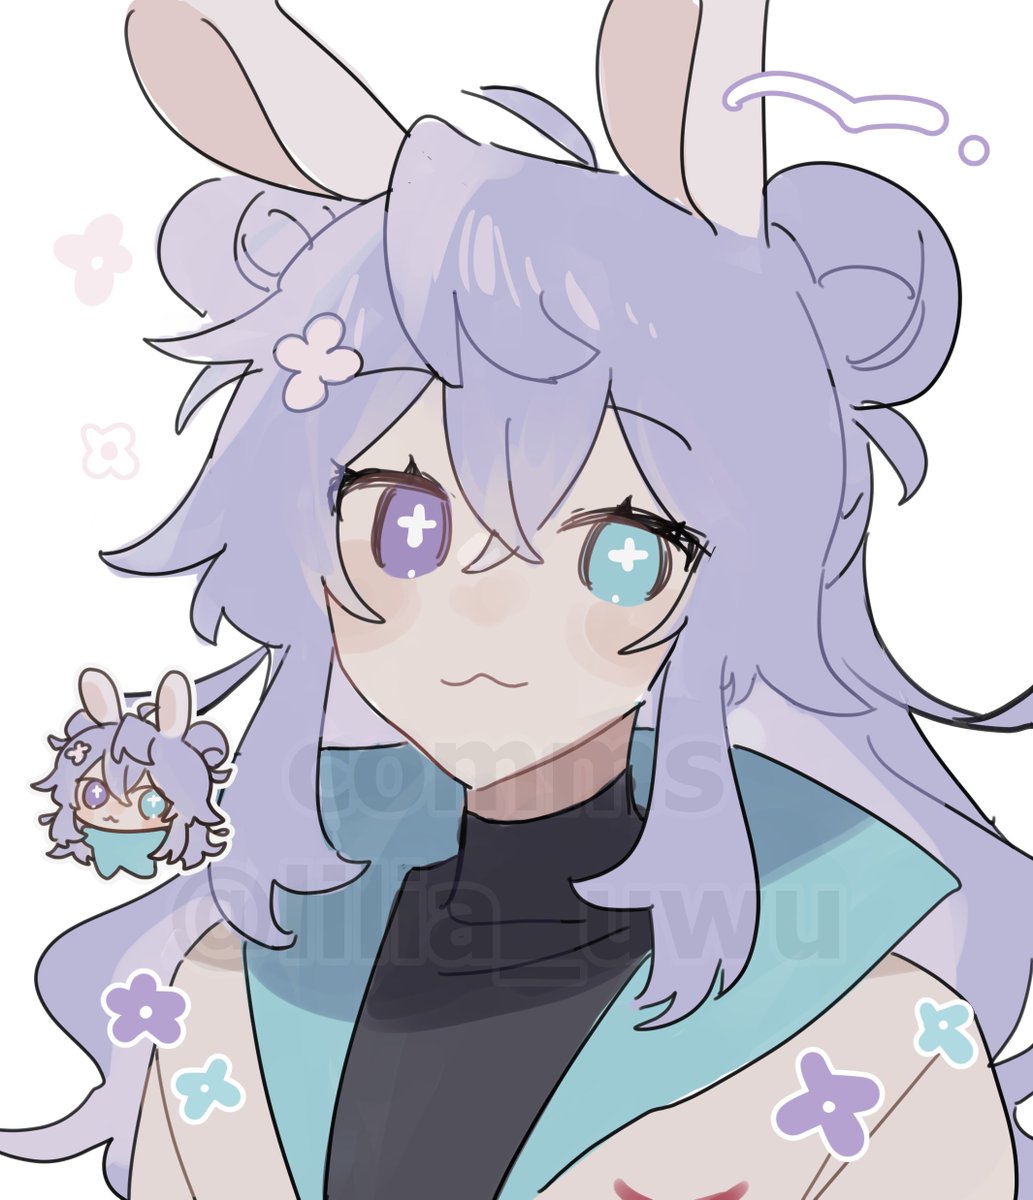 「doodle comms !! (1/3) 」|lilia @ working on comms!のイラスト